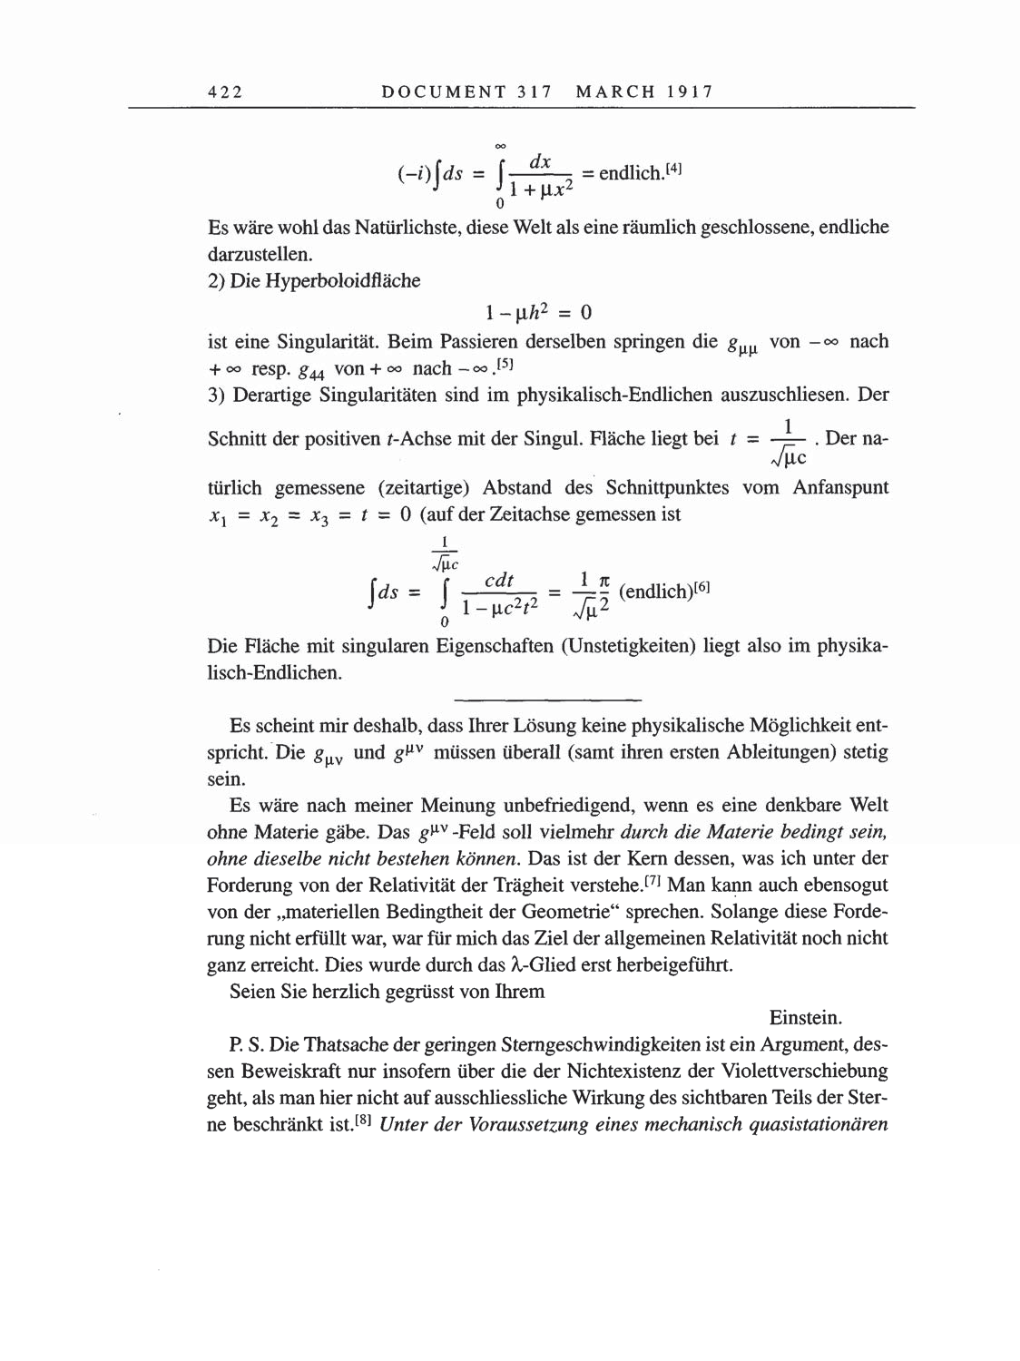 Volume 8, Part A: The Berlin Years: Correspondence 1914-1917 page 422